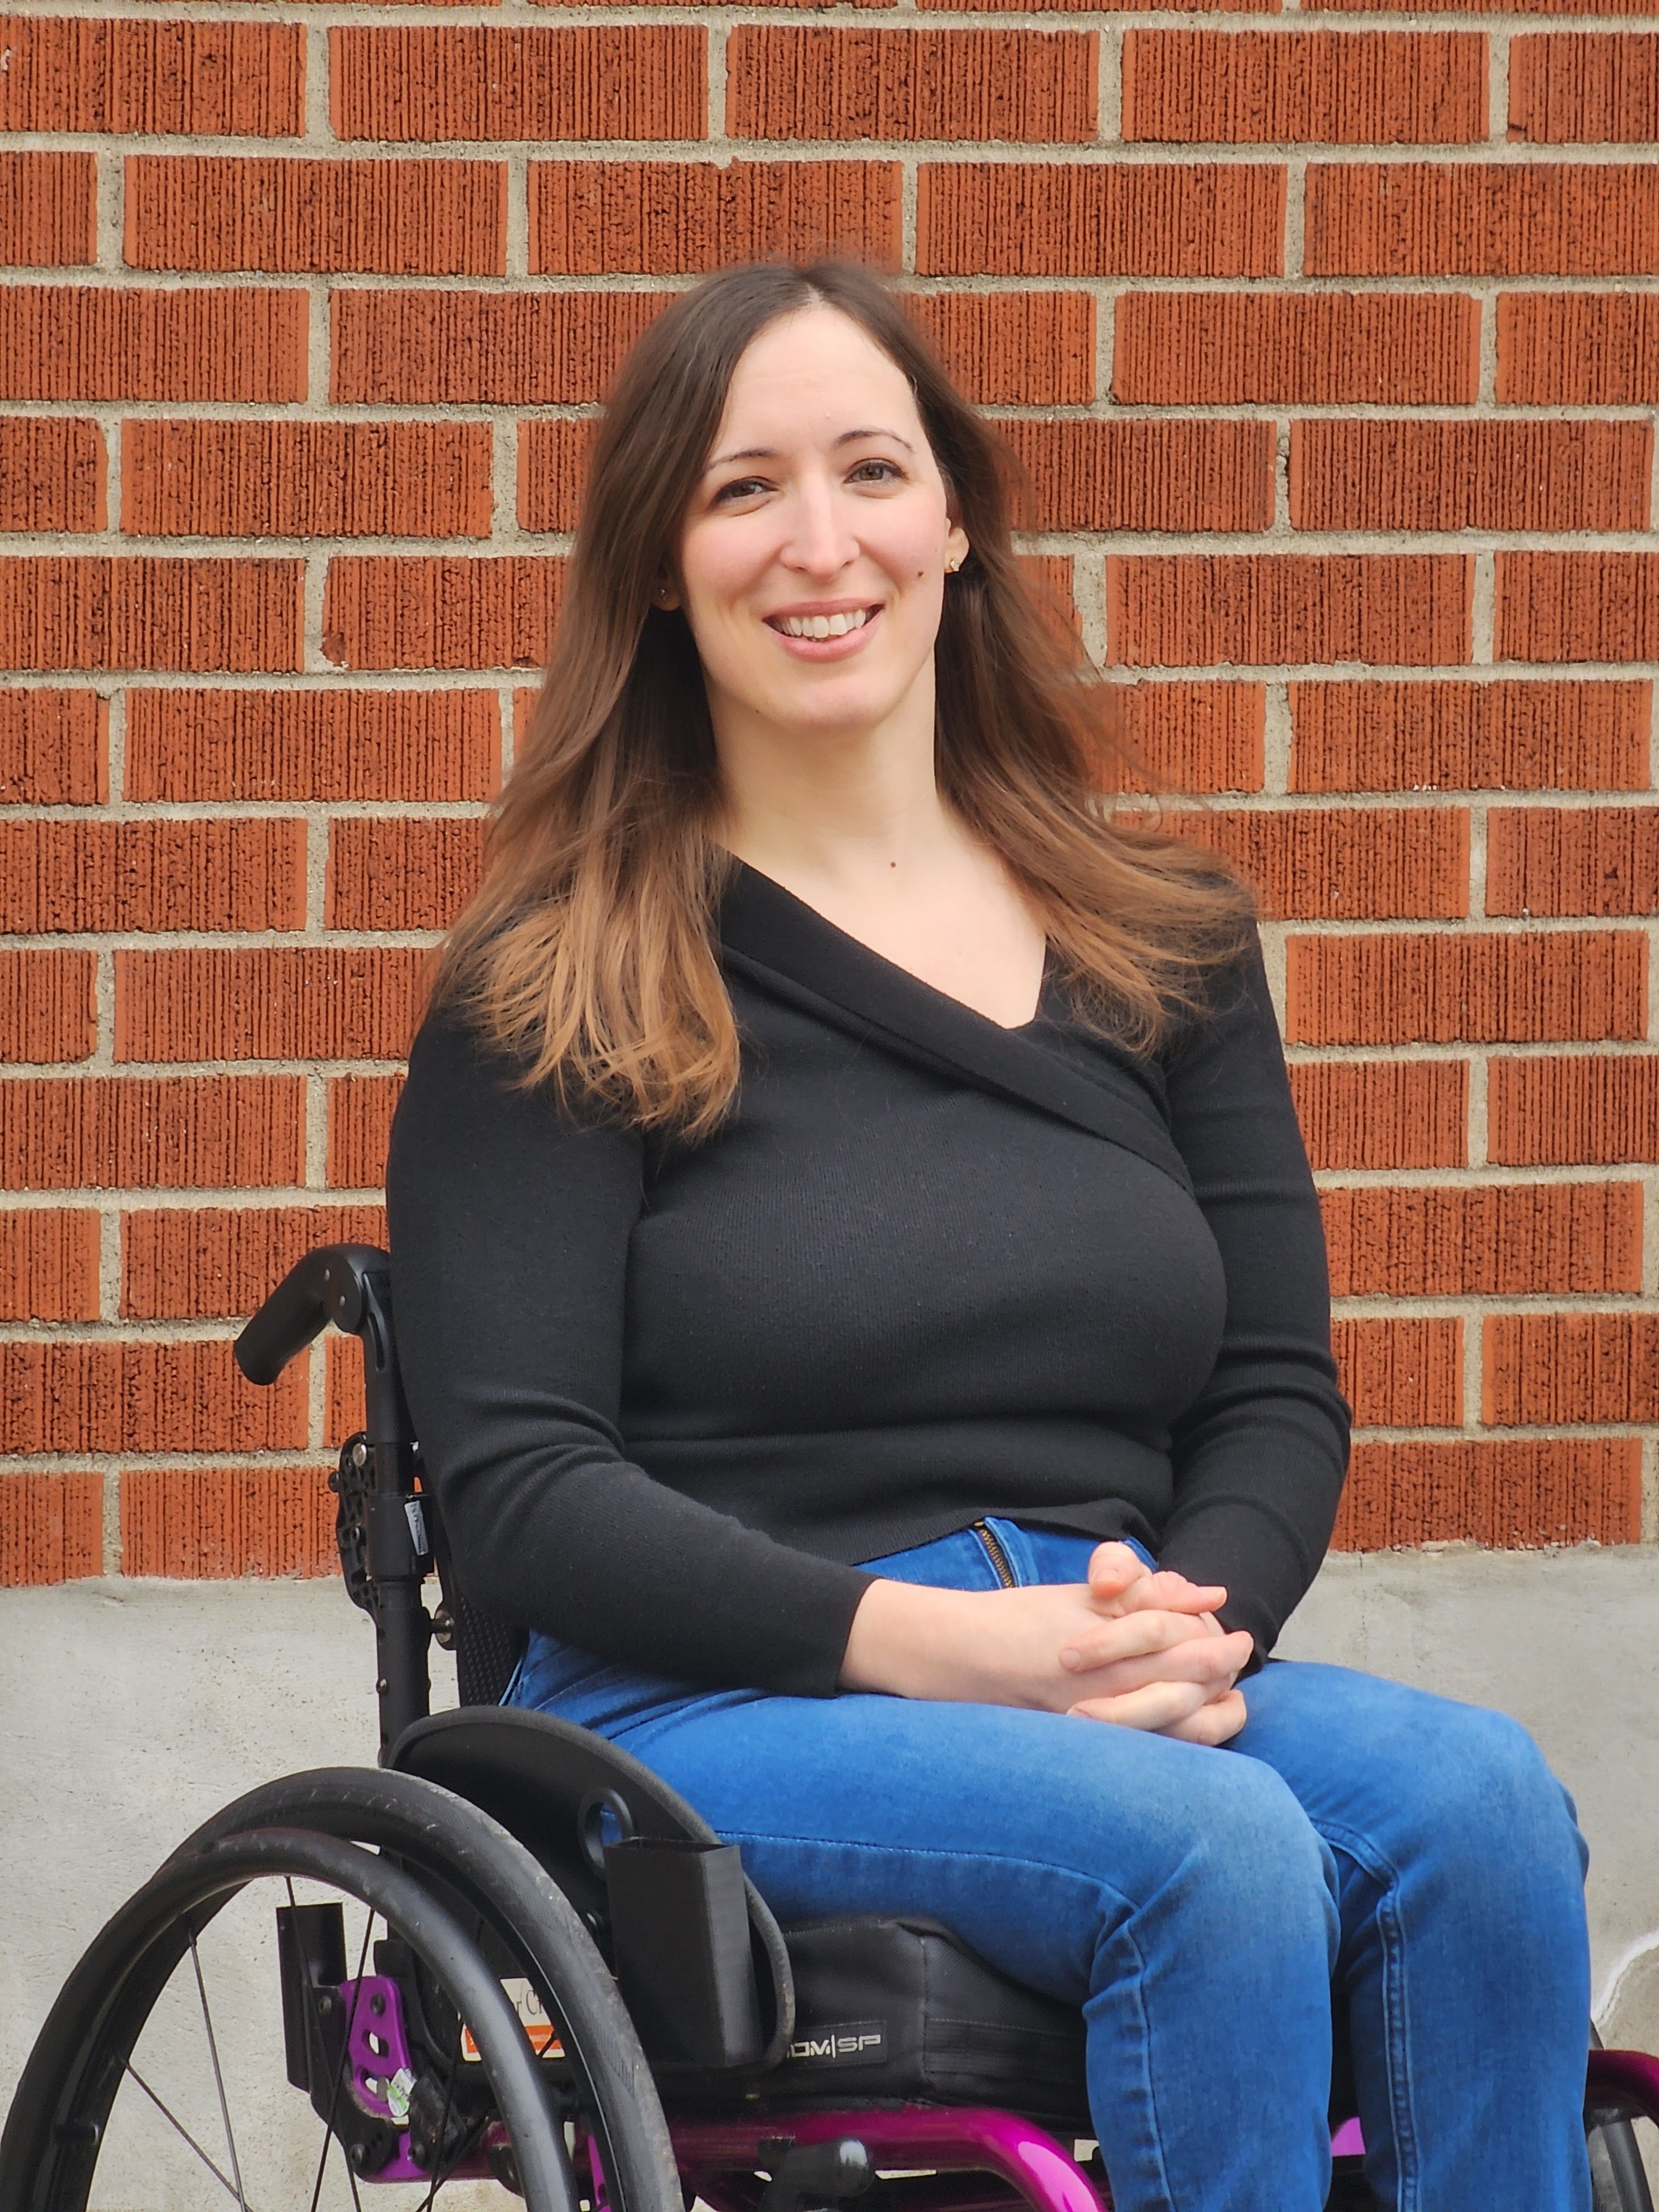 Leanne is a white woman with light brown hair, she is wearing a black shirt and jeans. She sits in a wheelchair.